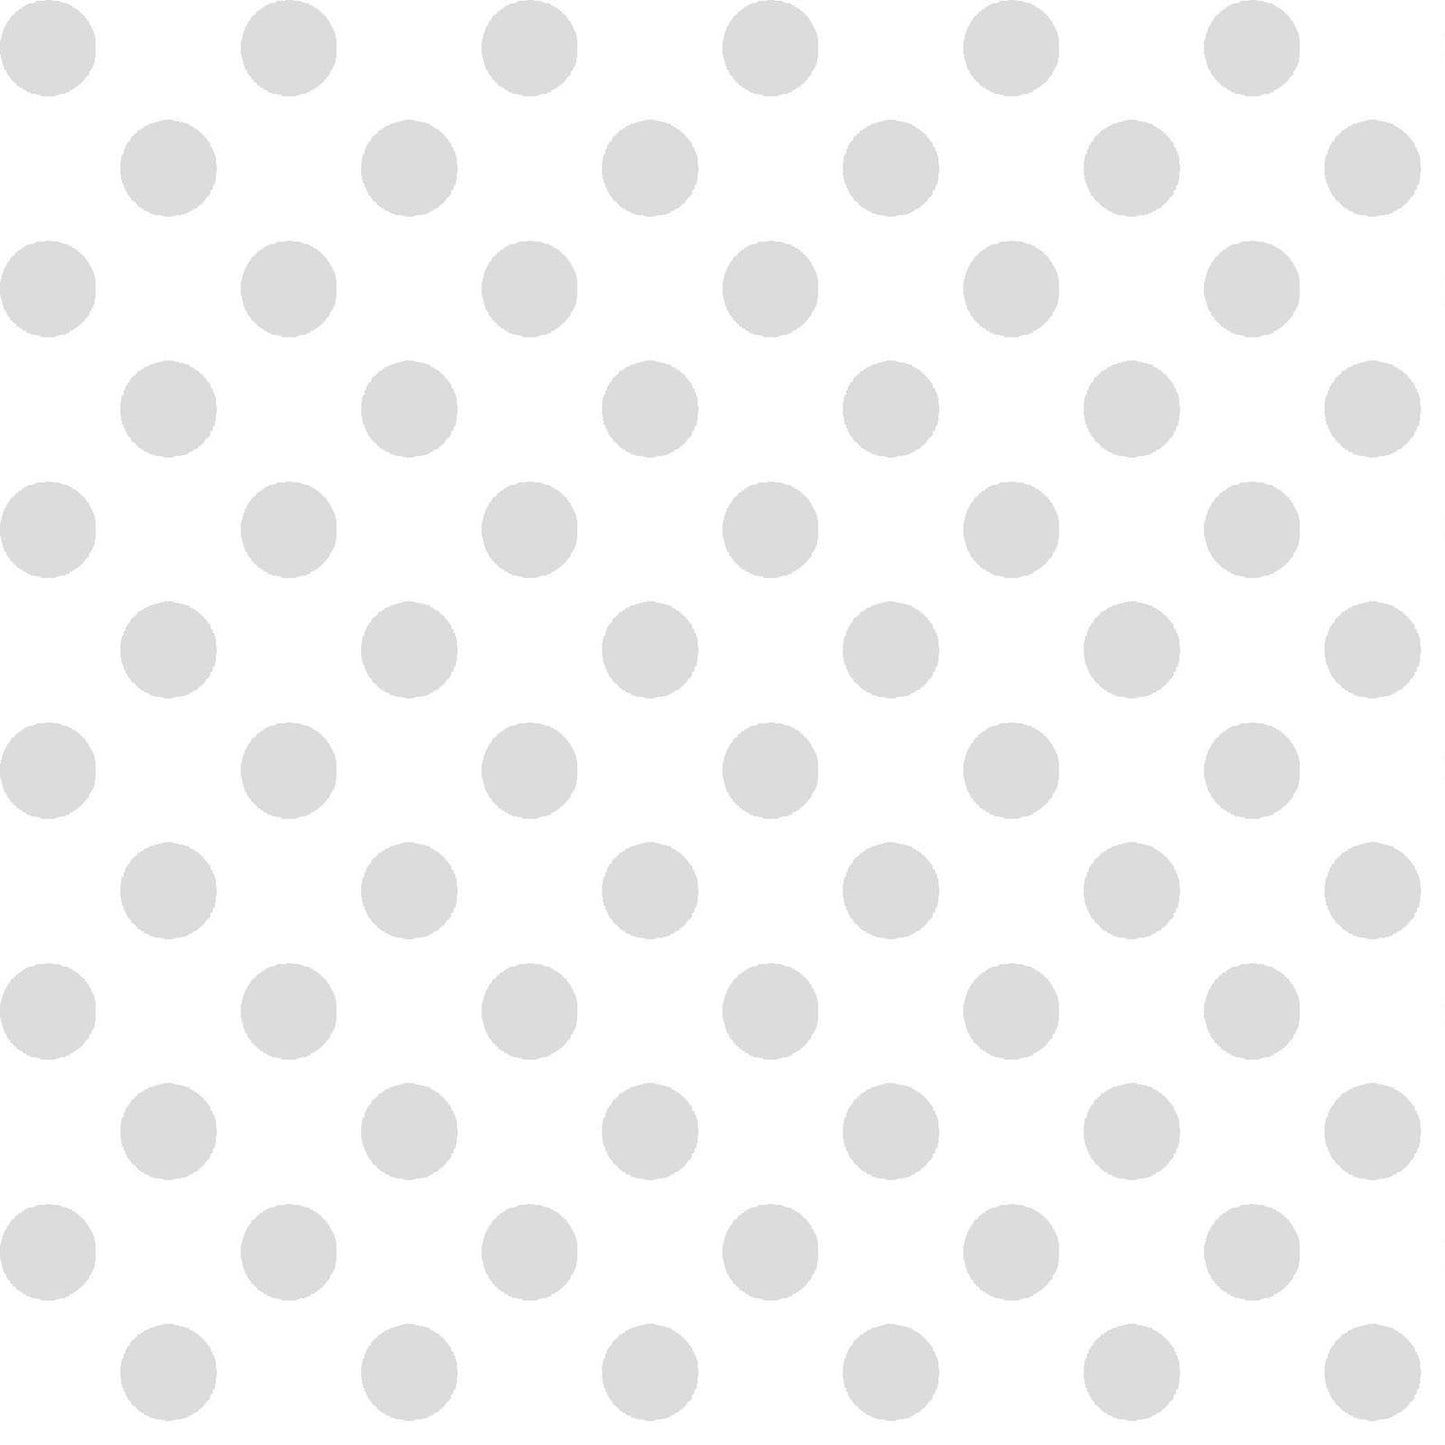 White on White Dots (MAS8216-WW) is part of the Kimberbell Basics line designed by Kim Christopherson for Maywood Studio. This fabric features large two-tone white dots in a symmetrical pattern. It is perfect for adding variety to any project and the pattern and color blend seamlessly with other Kimberbell Basic fabrics.